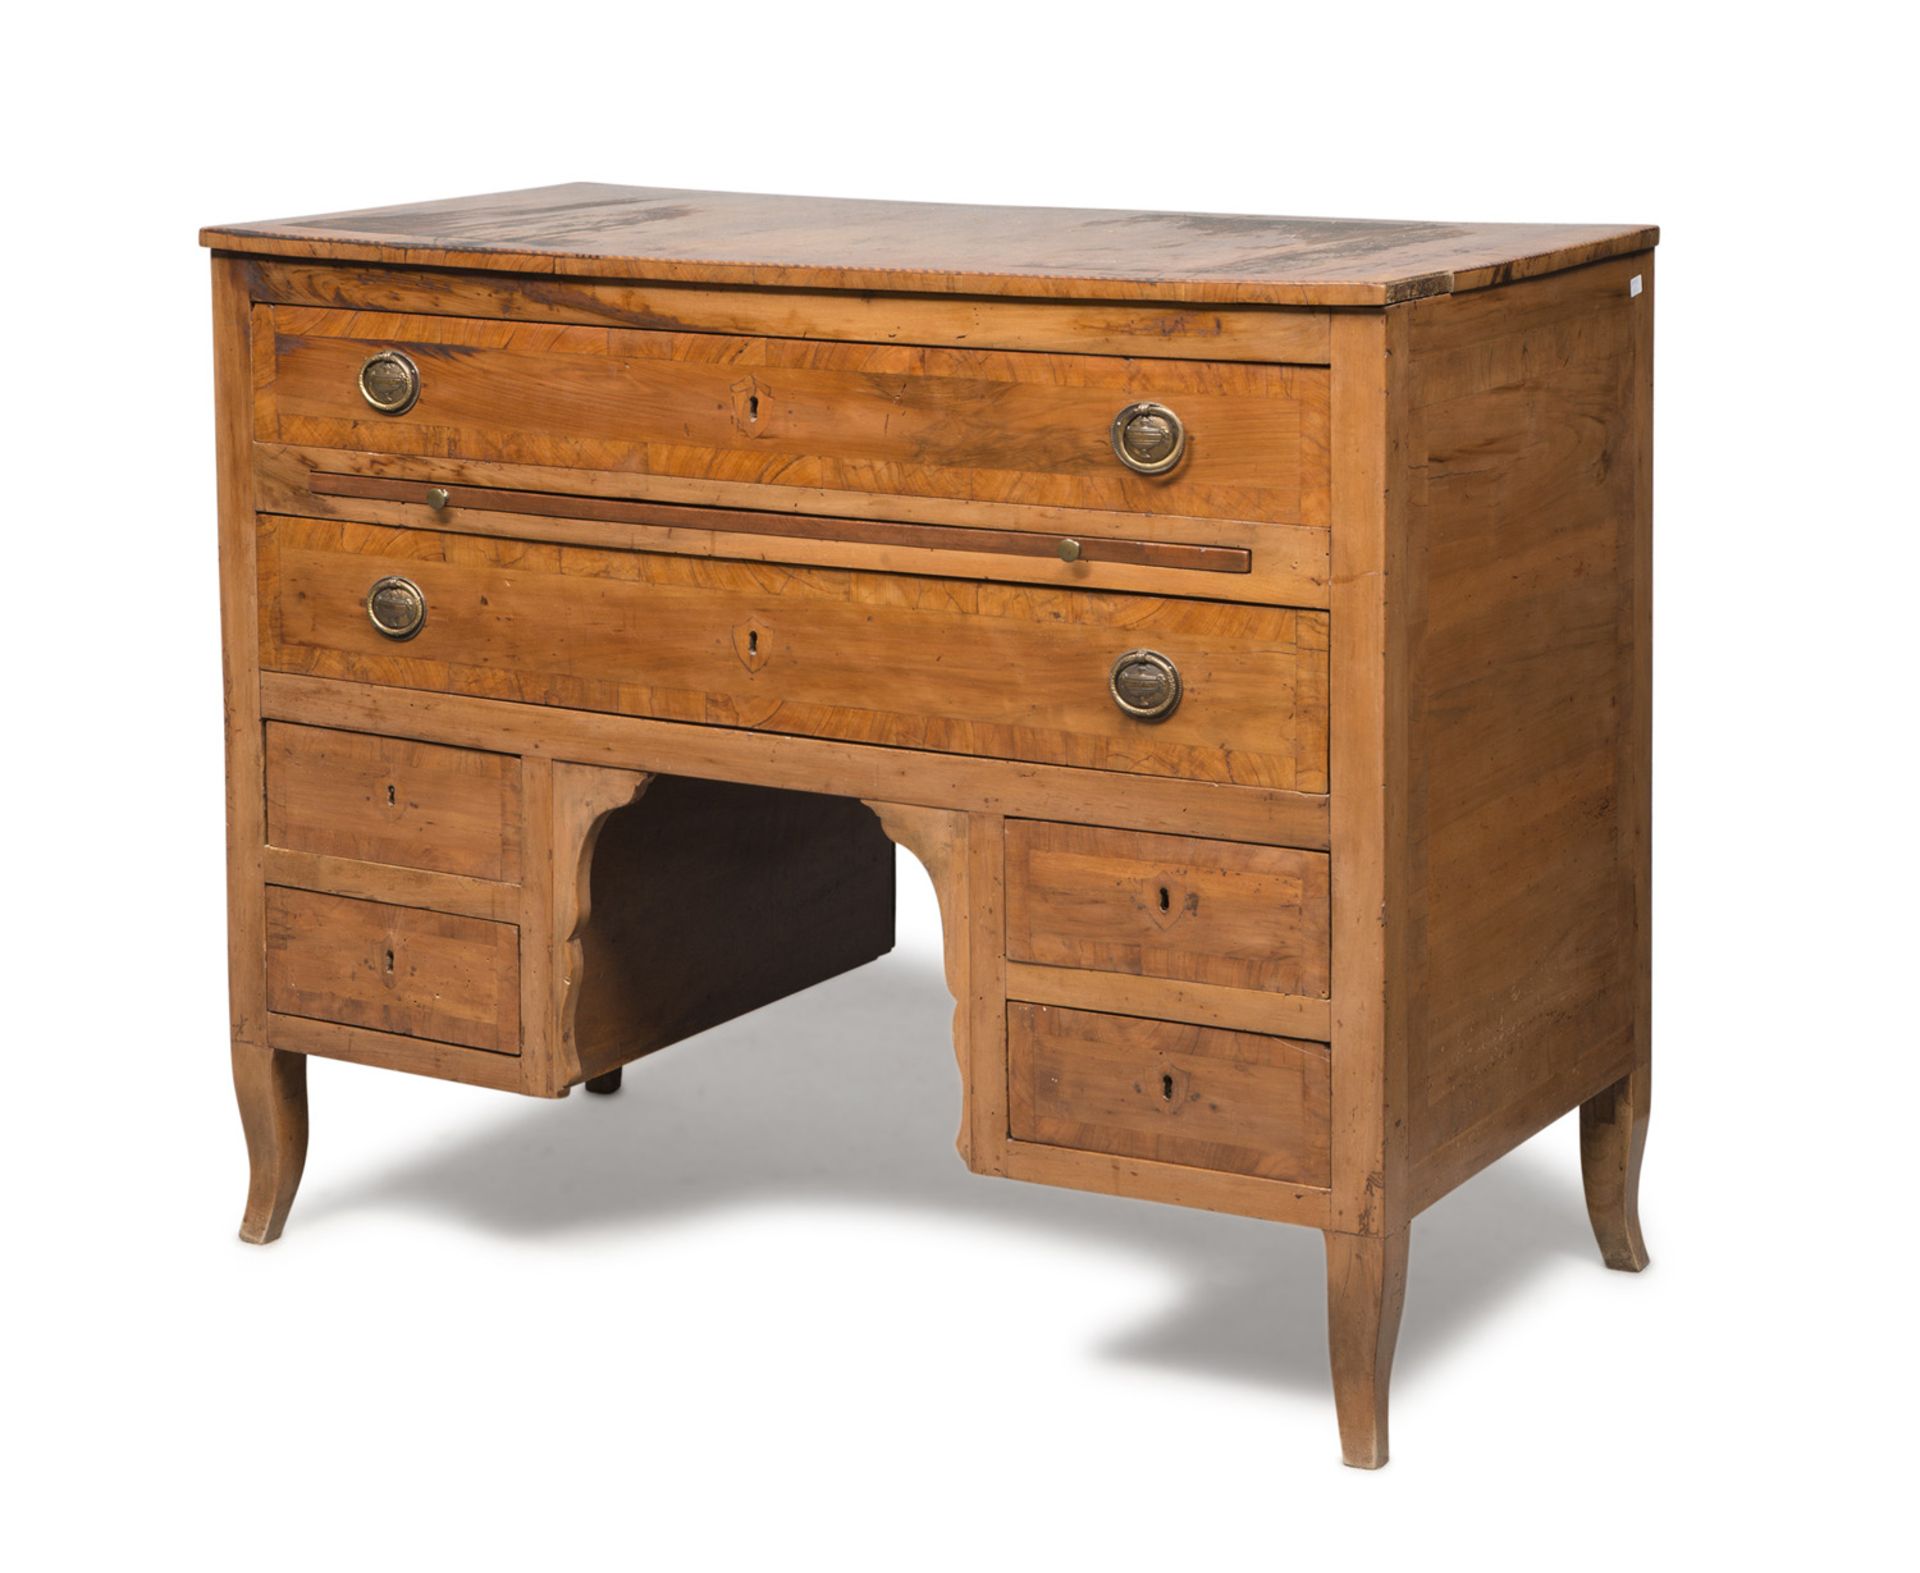 RARE WRITING DESK IN CHERRY TREE, PROBABLY TUSCAN, LATE 18TH CENTURY with reserves in rosewood and